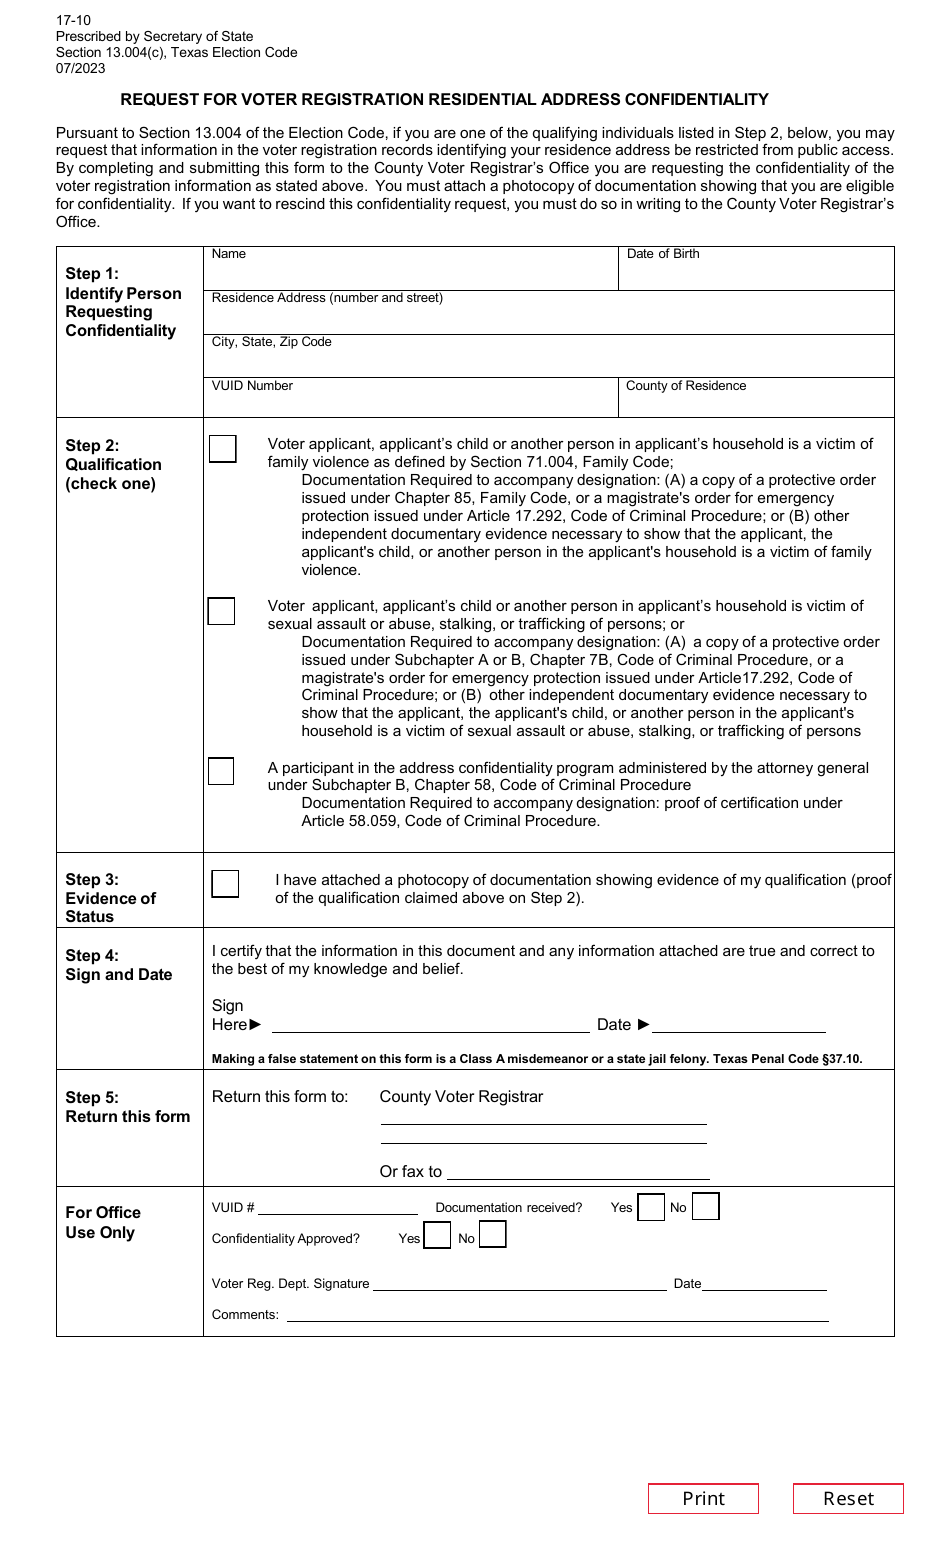 Page 17-10 Request for Voter Registration Residential Address Confidentiality - Texas (English / Spanish), Page 1